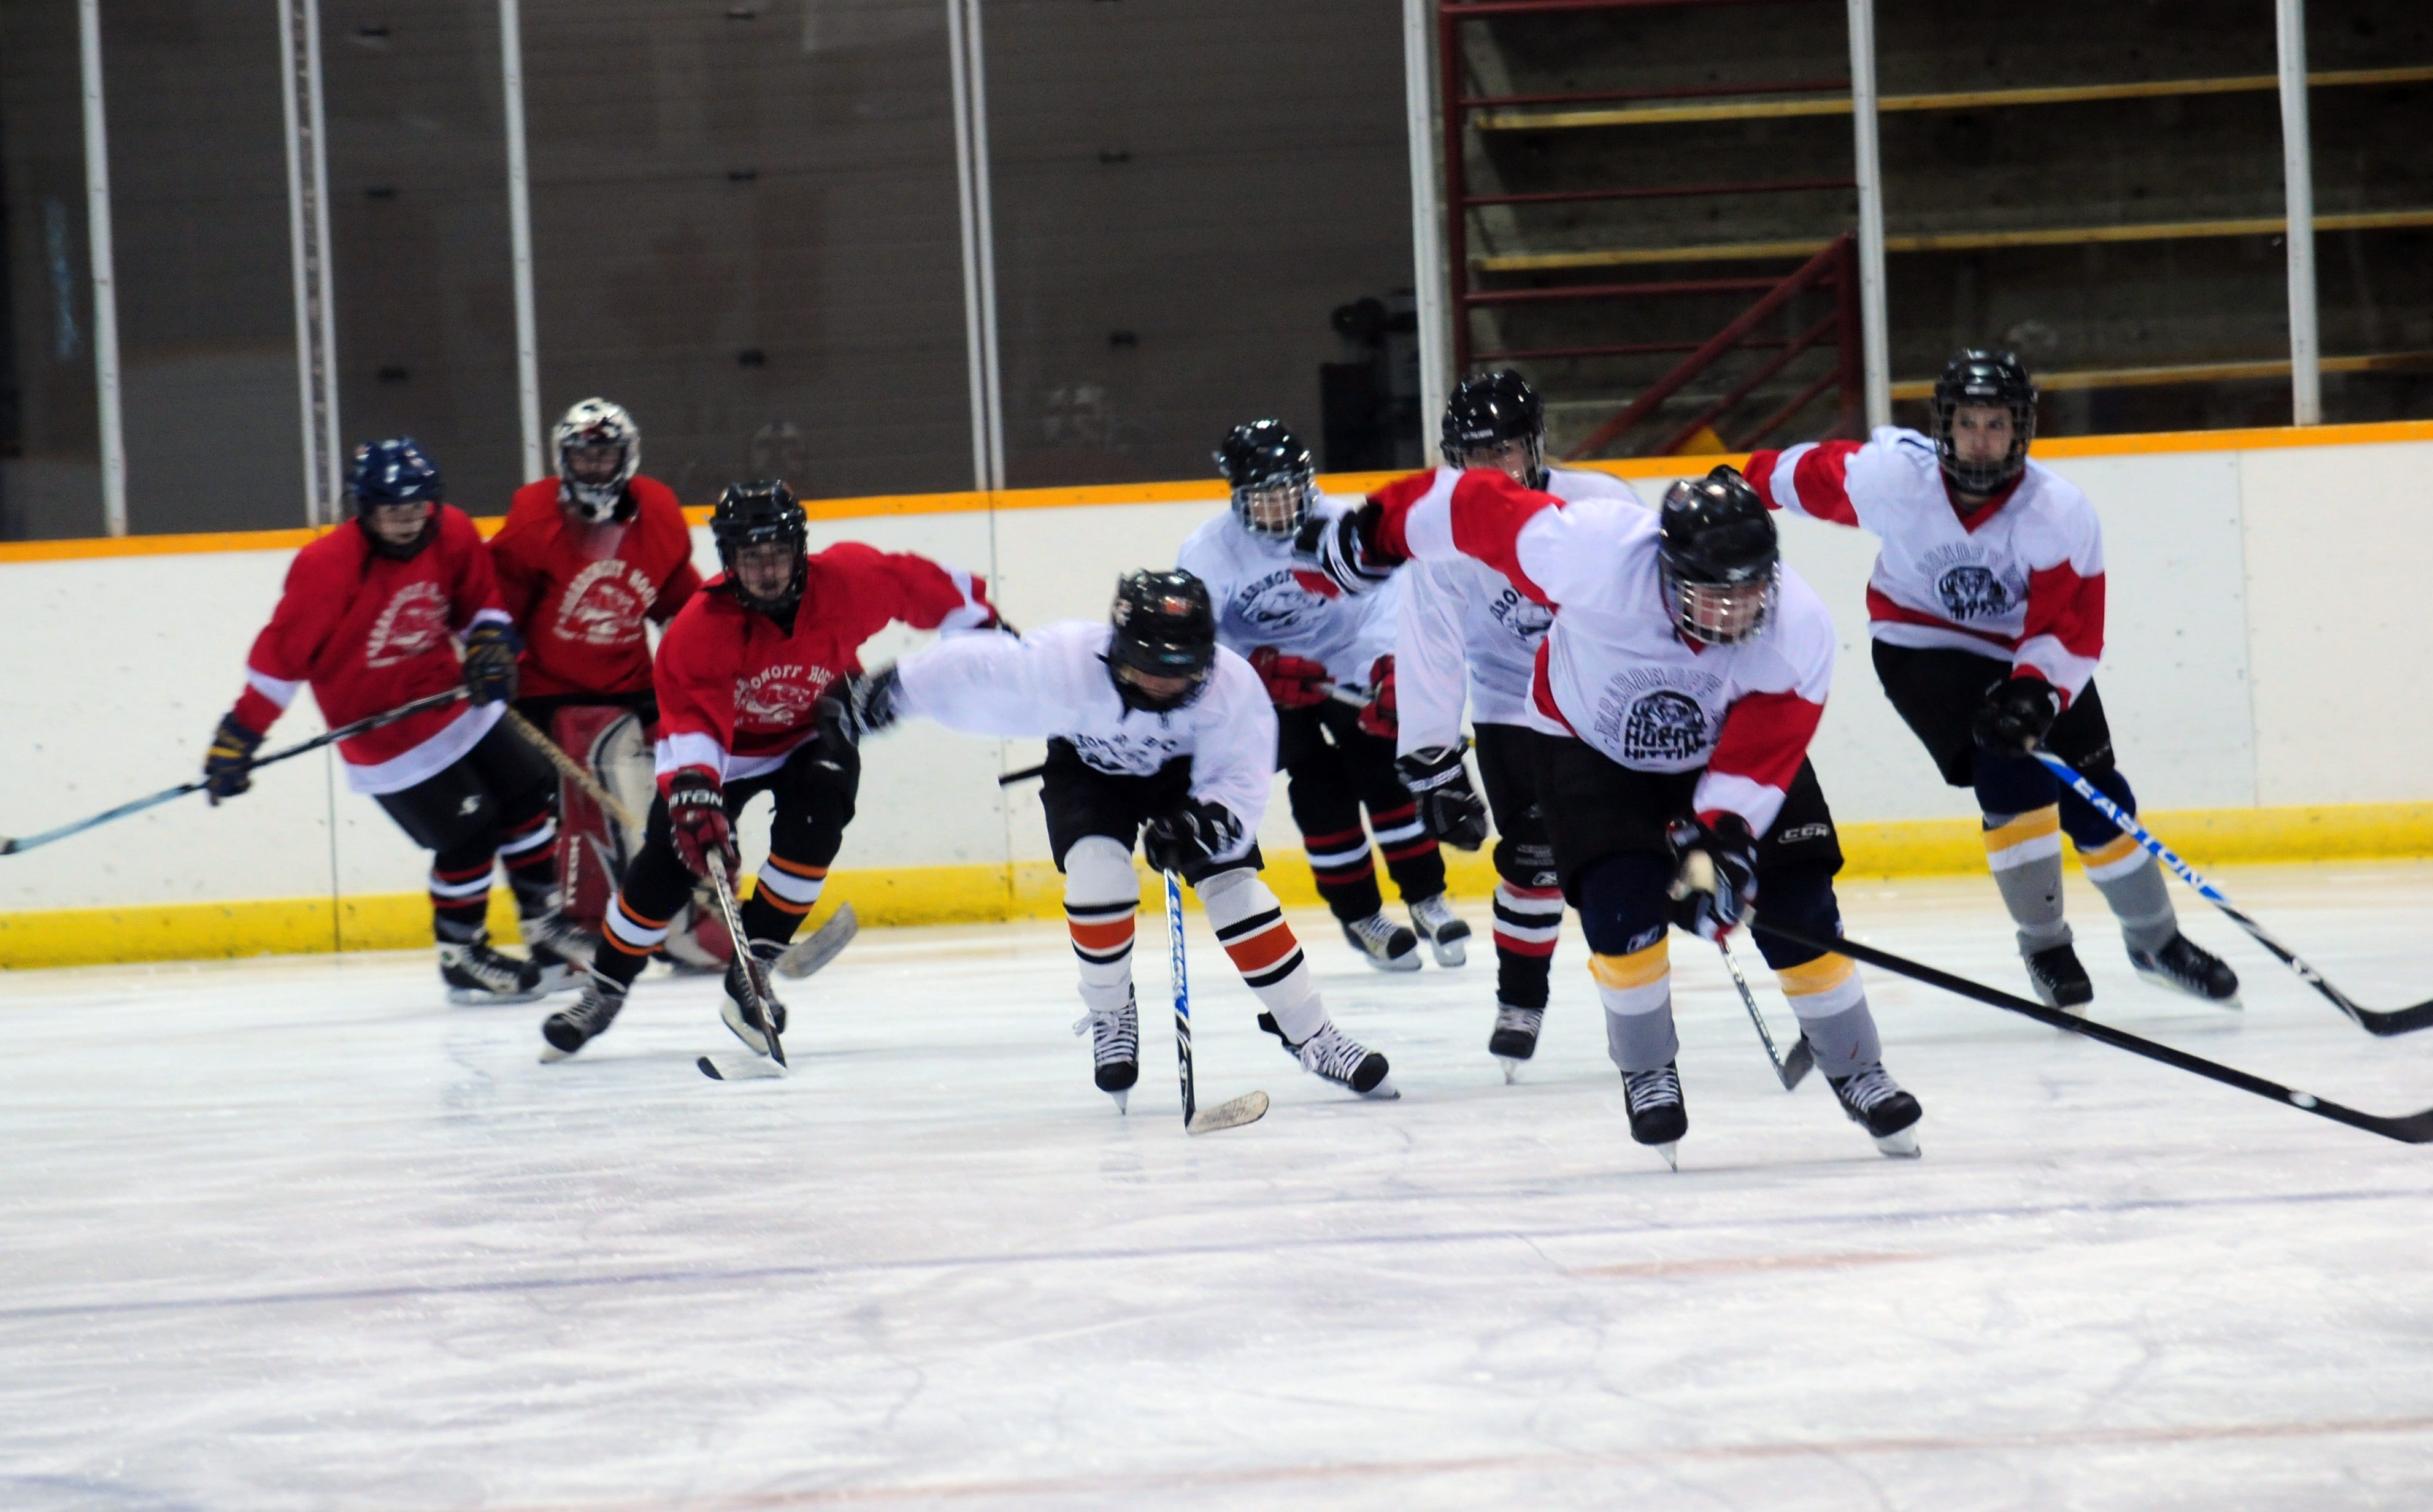 HARD PRACTICE- Hockey is back as players took to the ice for a practice Friday evening at the Red Deer Arena downtown.